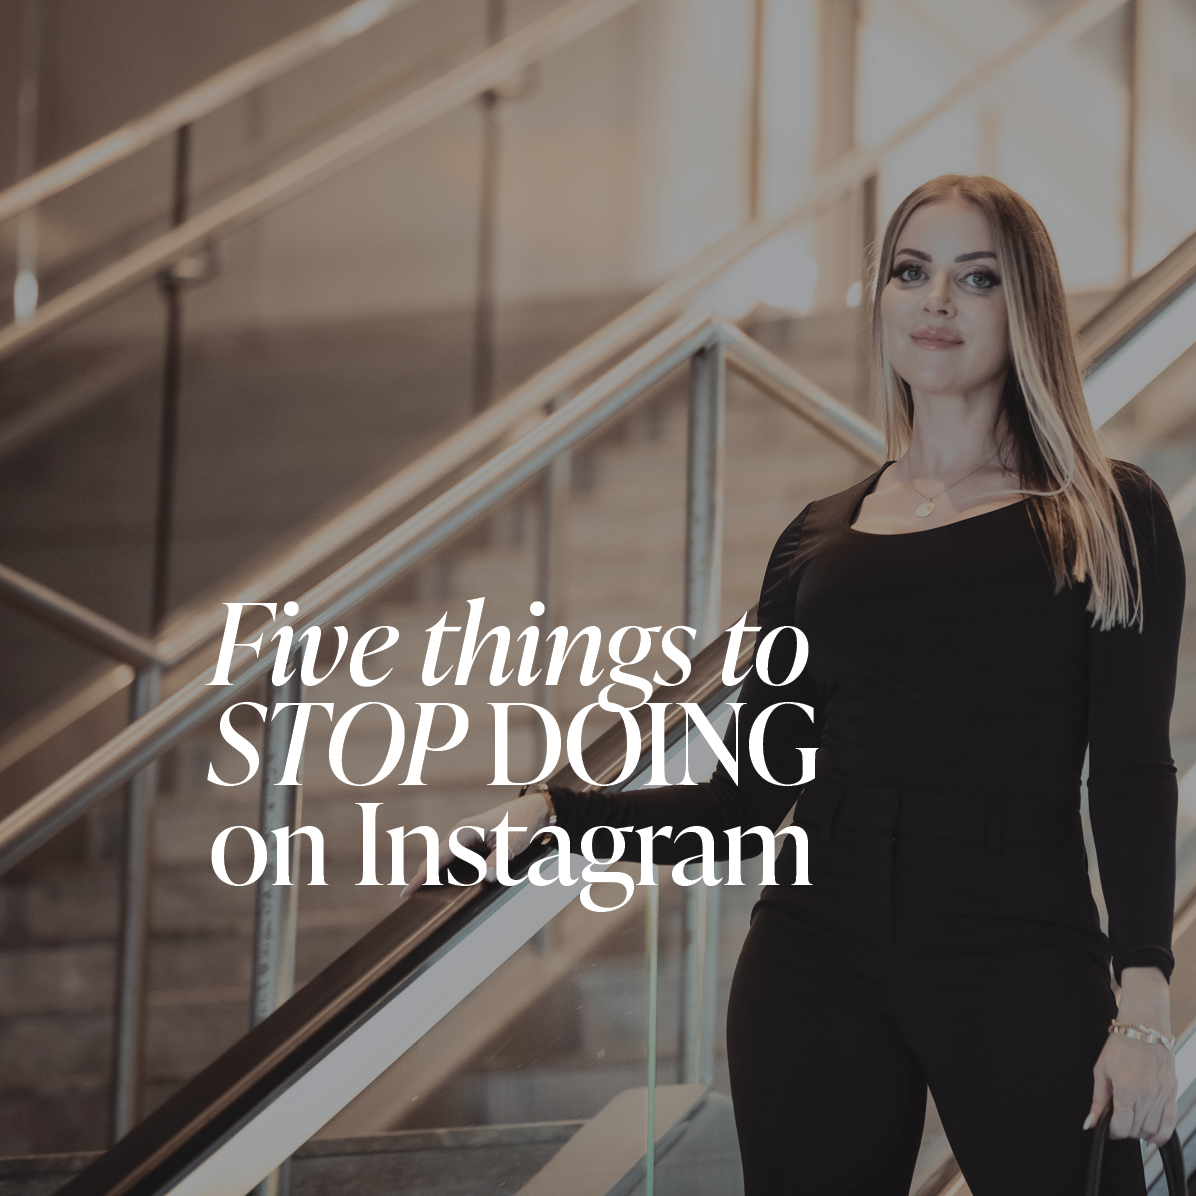 Women standing on a staircase with white text overlay "Five Things to Stop Doing on Instagram"